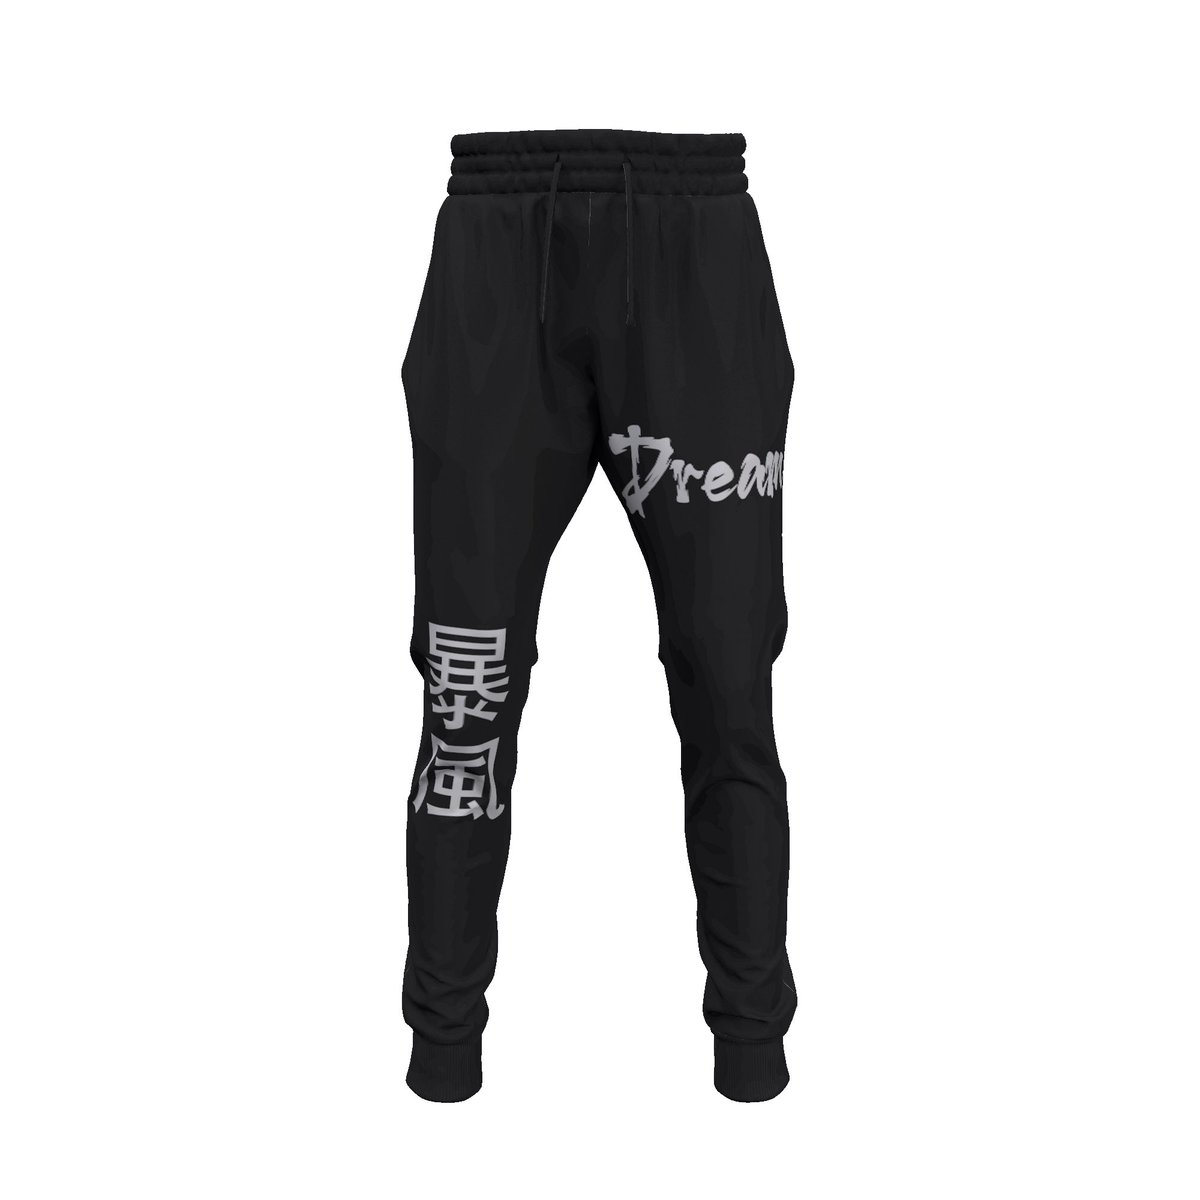 Who wants some new joggers?